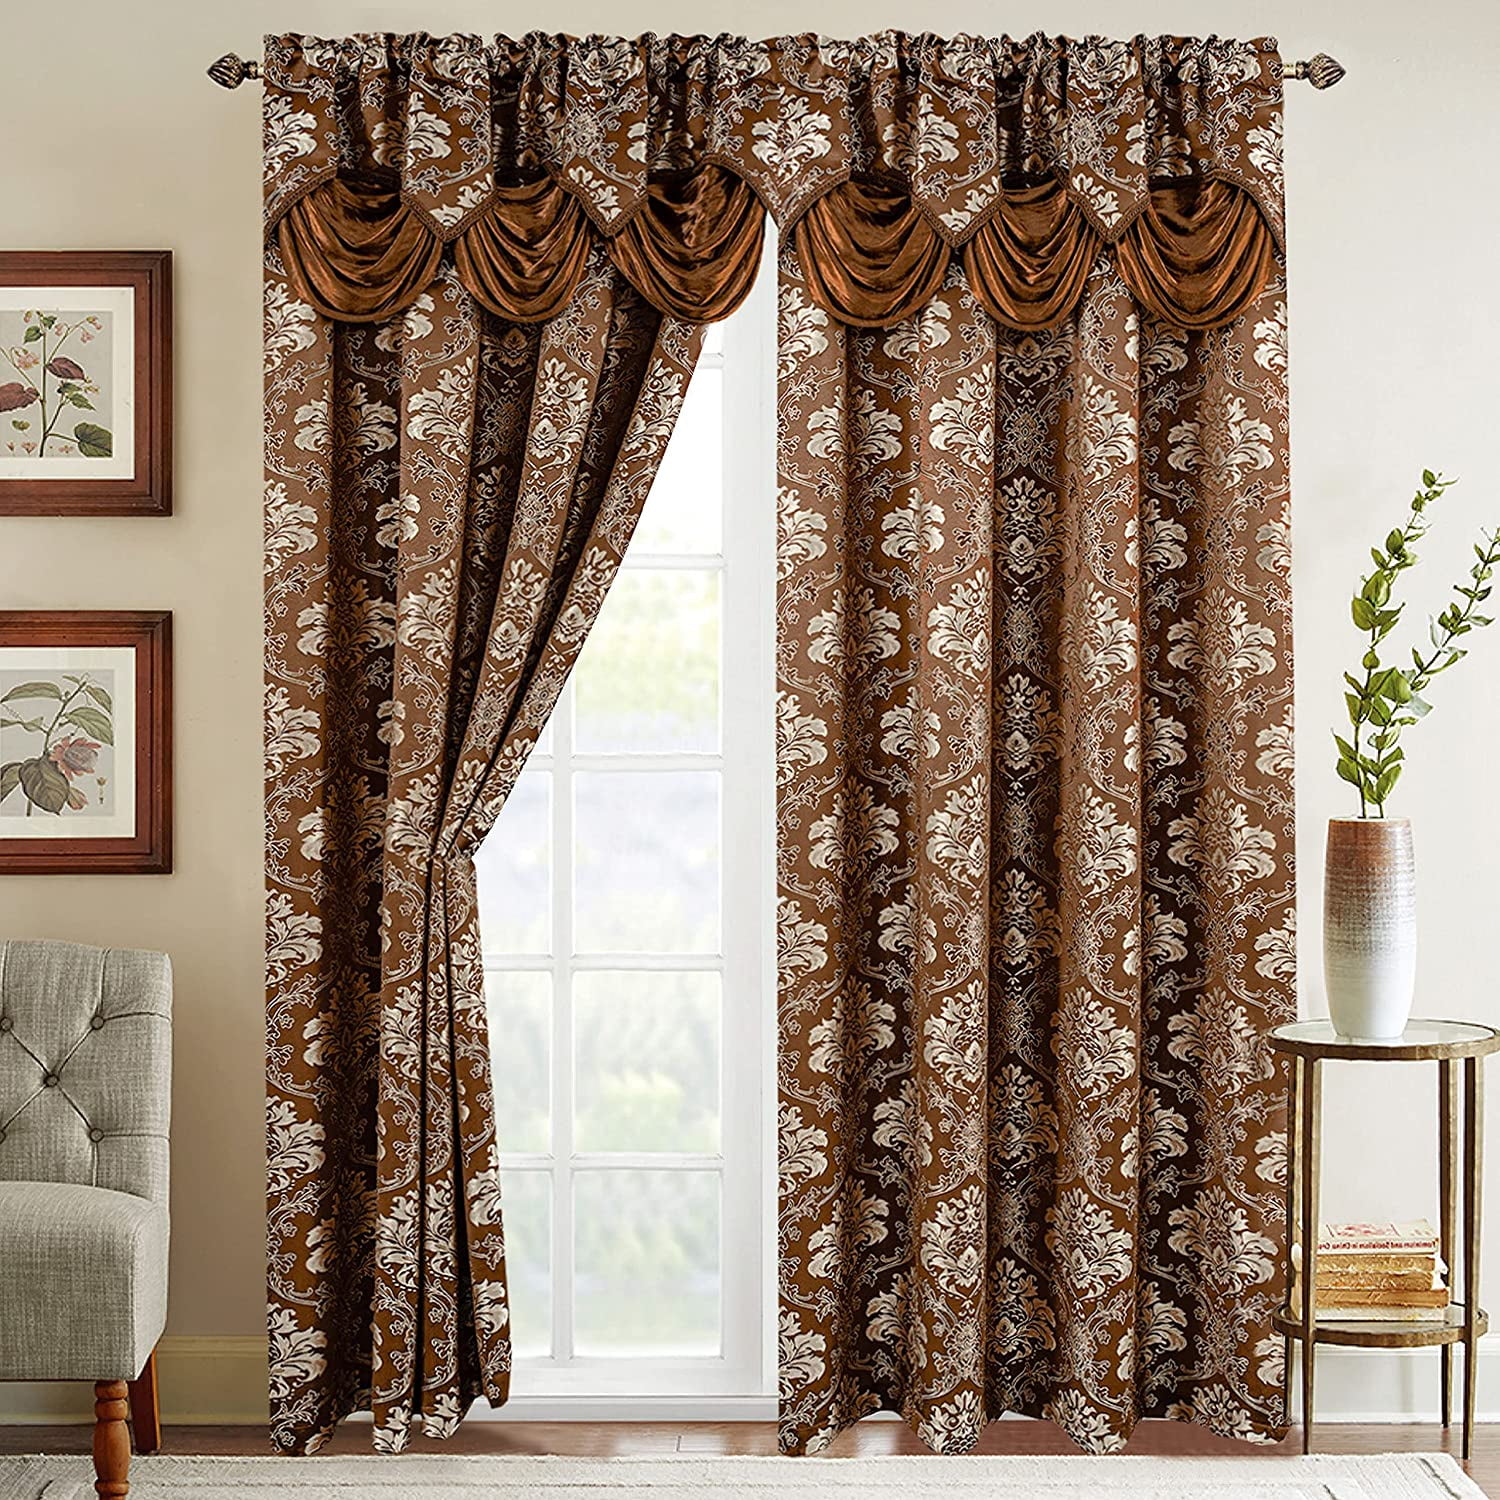 Enhance Your Curtain Experience with Perfect Pleats